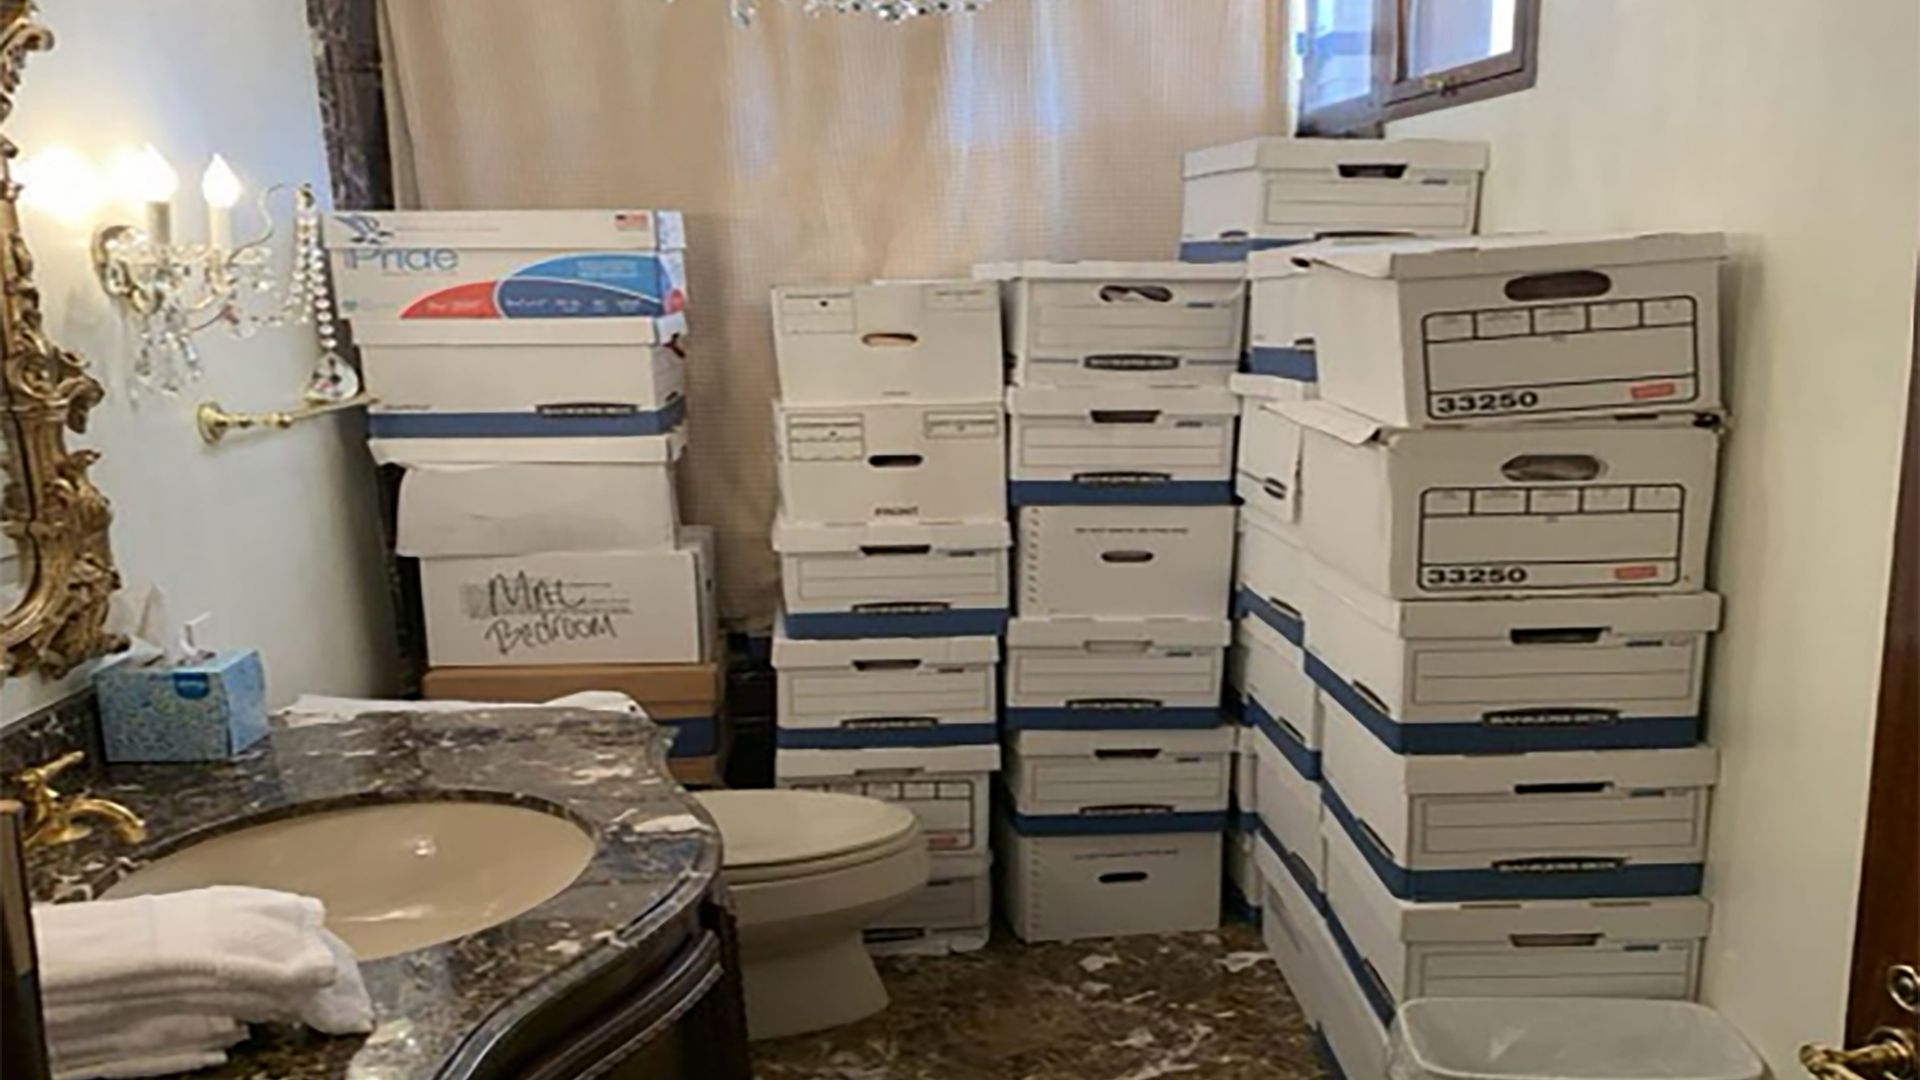  In this handout photo provided by the U.S. Department of Justice, stacks of boxes can be observed in a bathroom and shower in The Mar-a-Lago Club’s Lake Room 